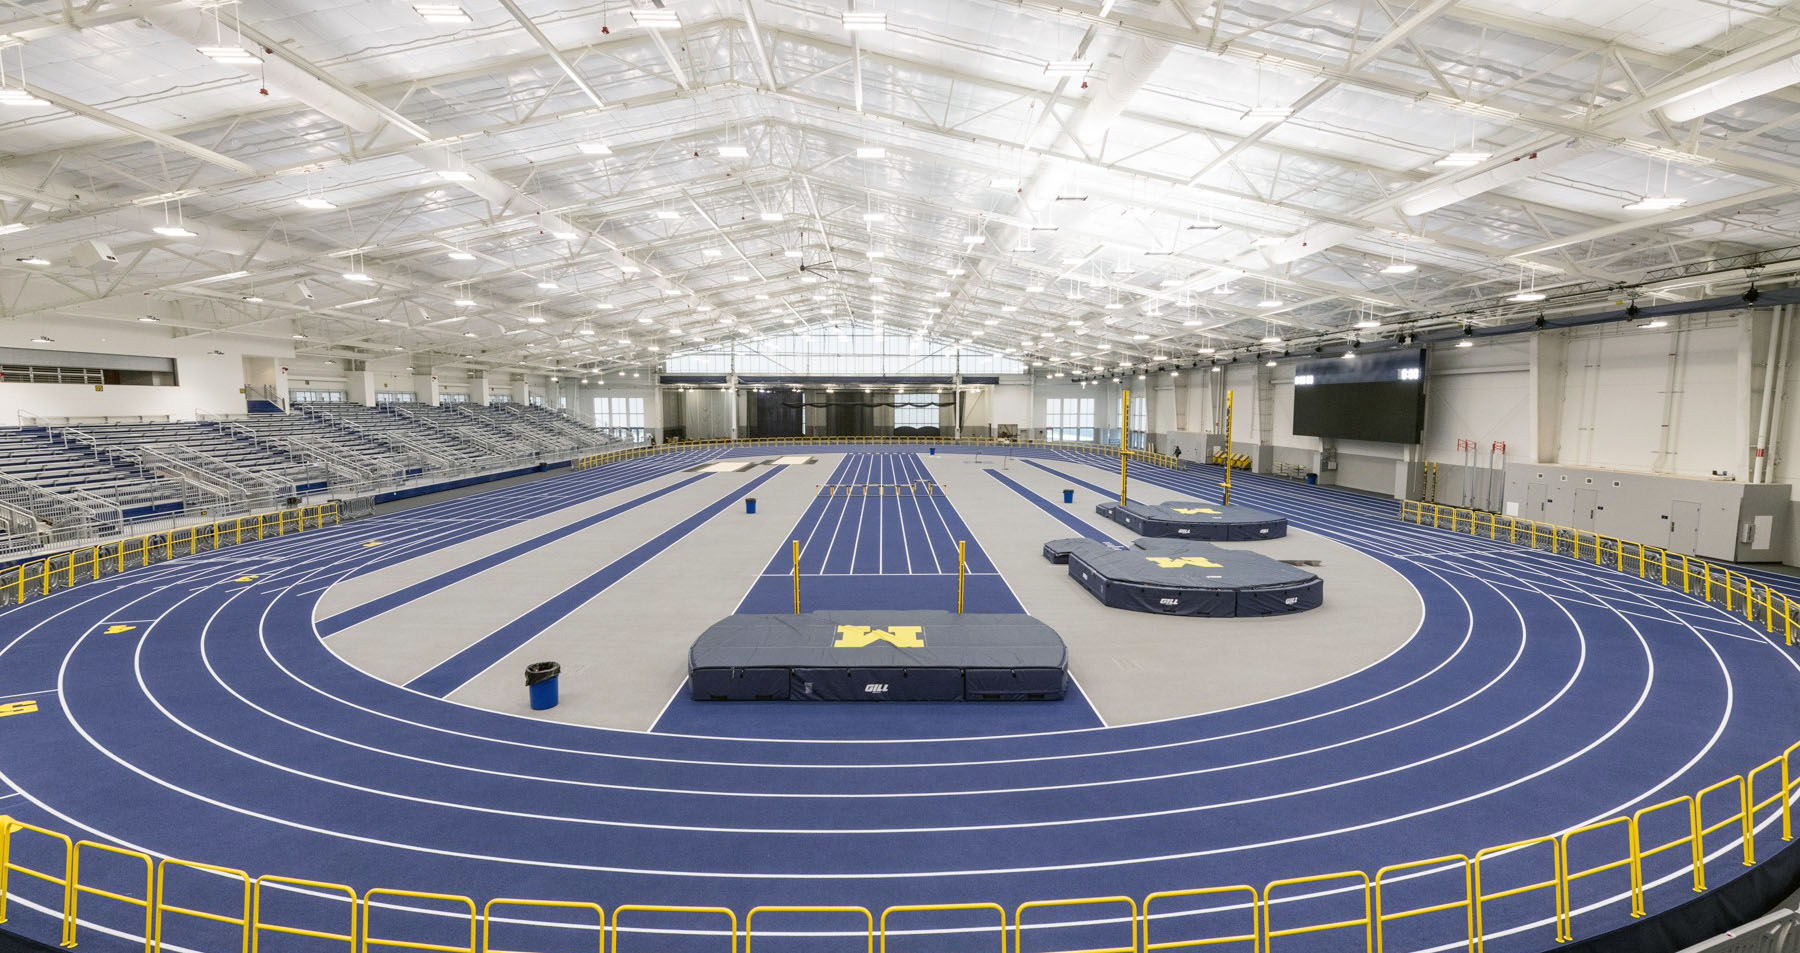 The University of Michigan's indoor track & field facility is among the finest in the country.